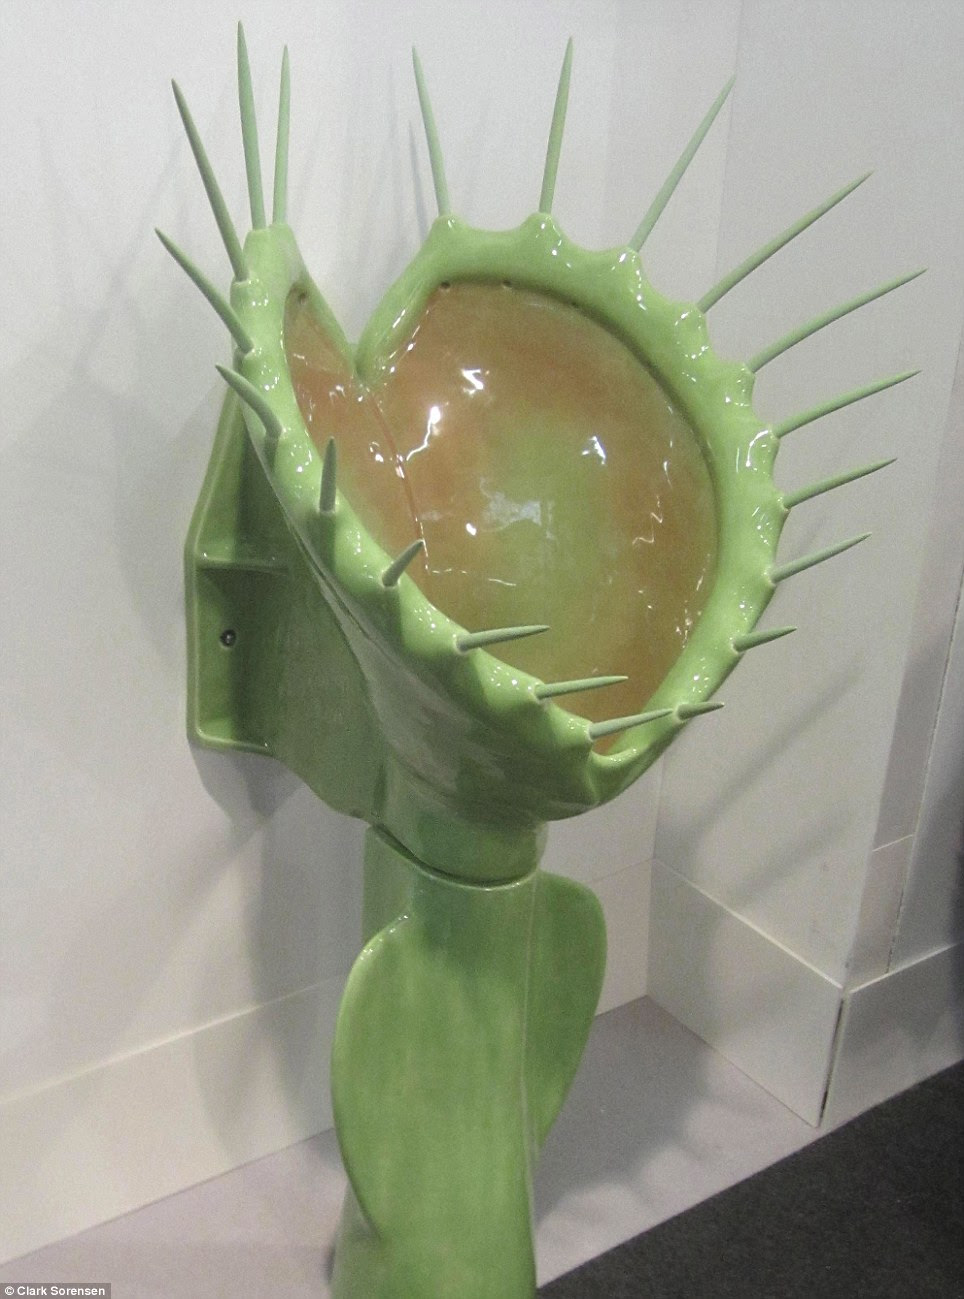 Ouch! This Venus Fly Trap urinal comes with a $11,500 price tag and a full set of spikes, but fortunately for its future users, they are made of silicone rubber